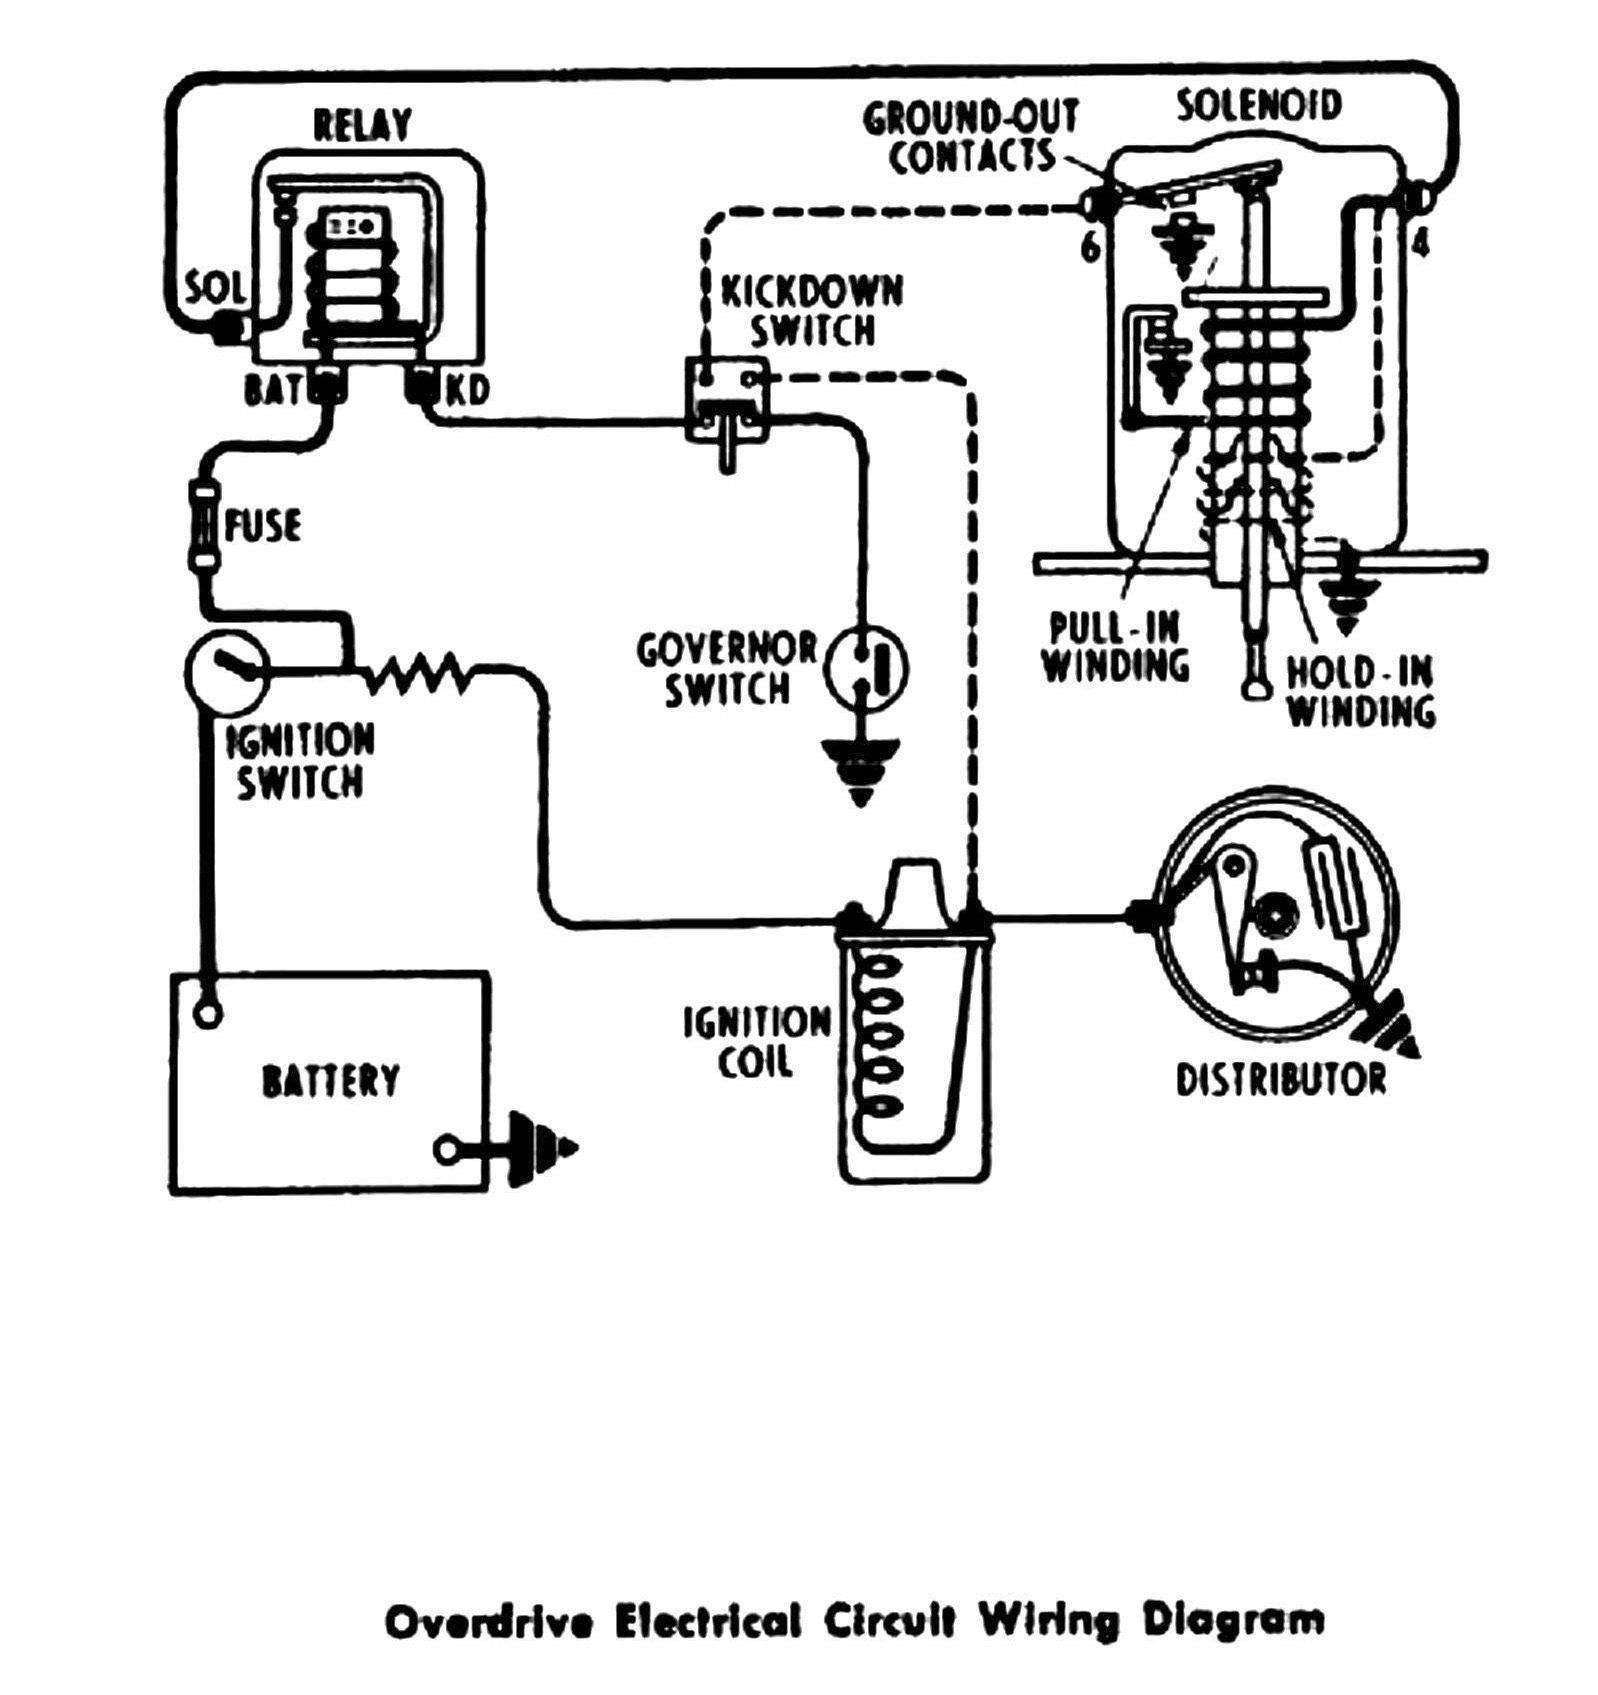 1955 Chevrolet Overdrive wiring